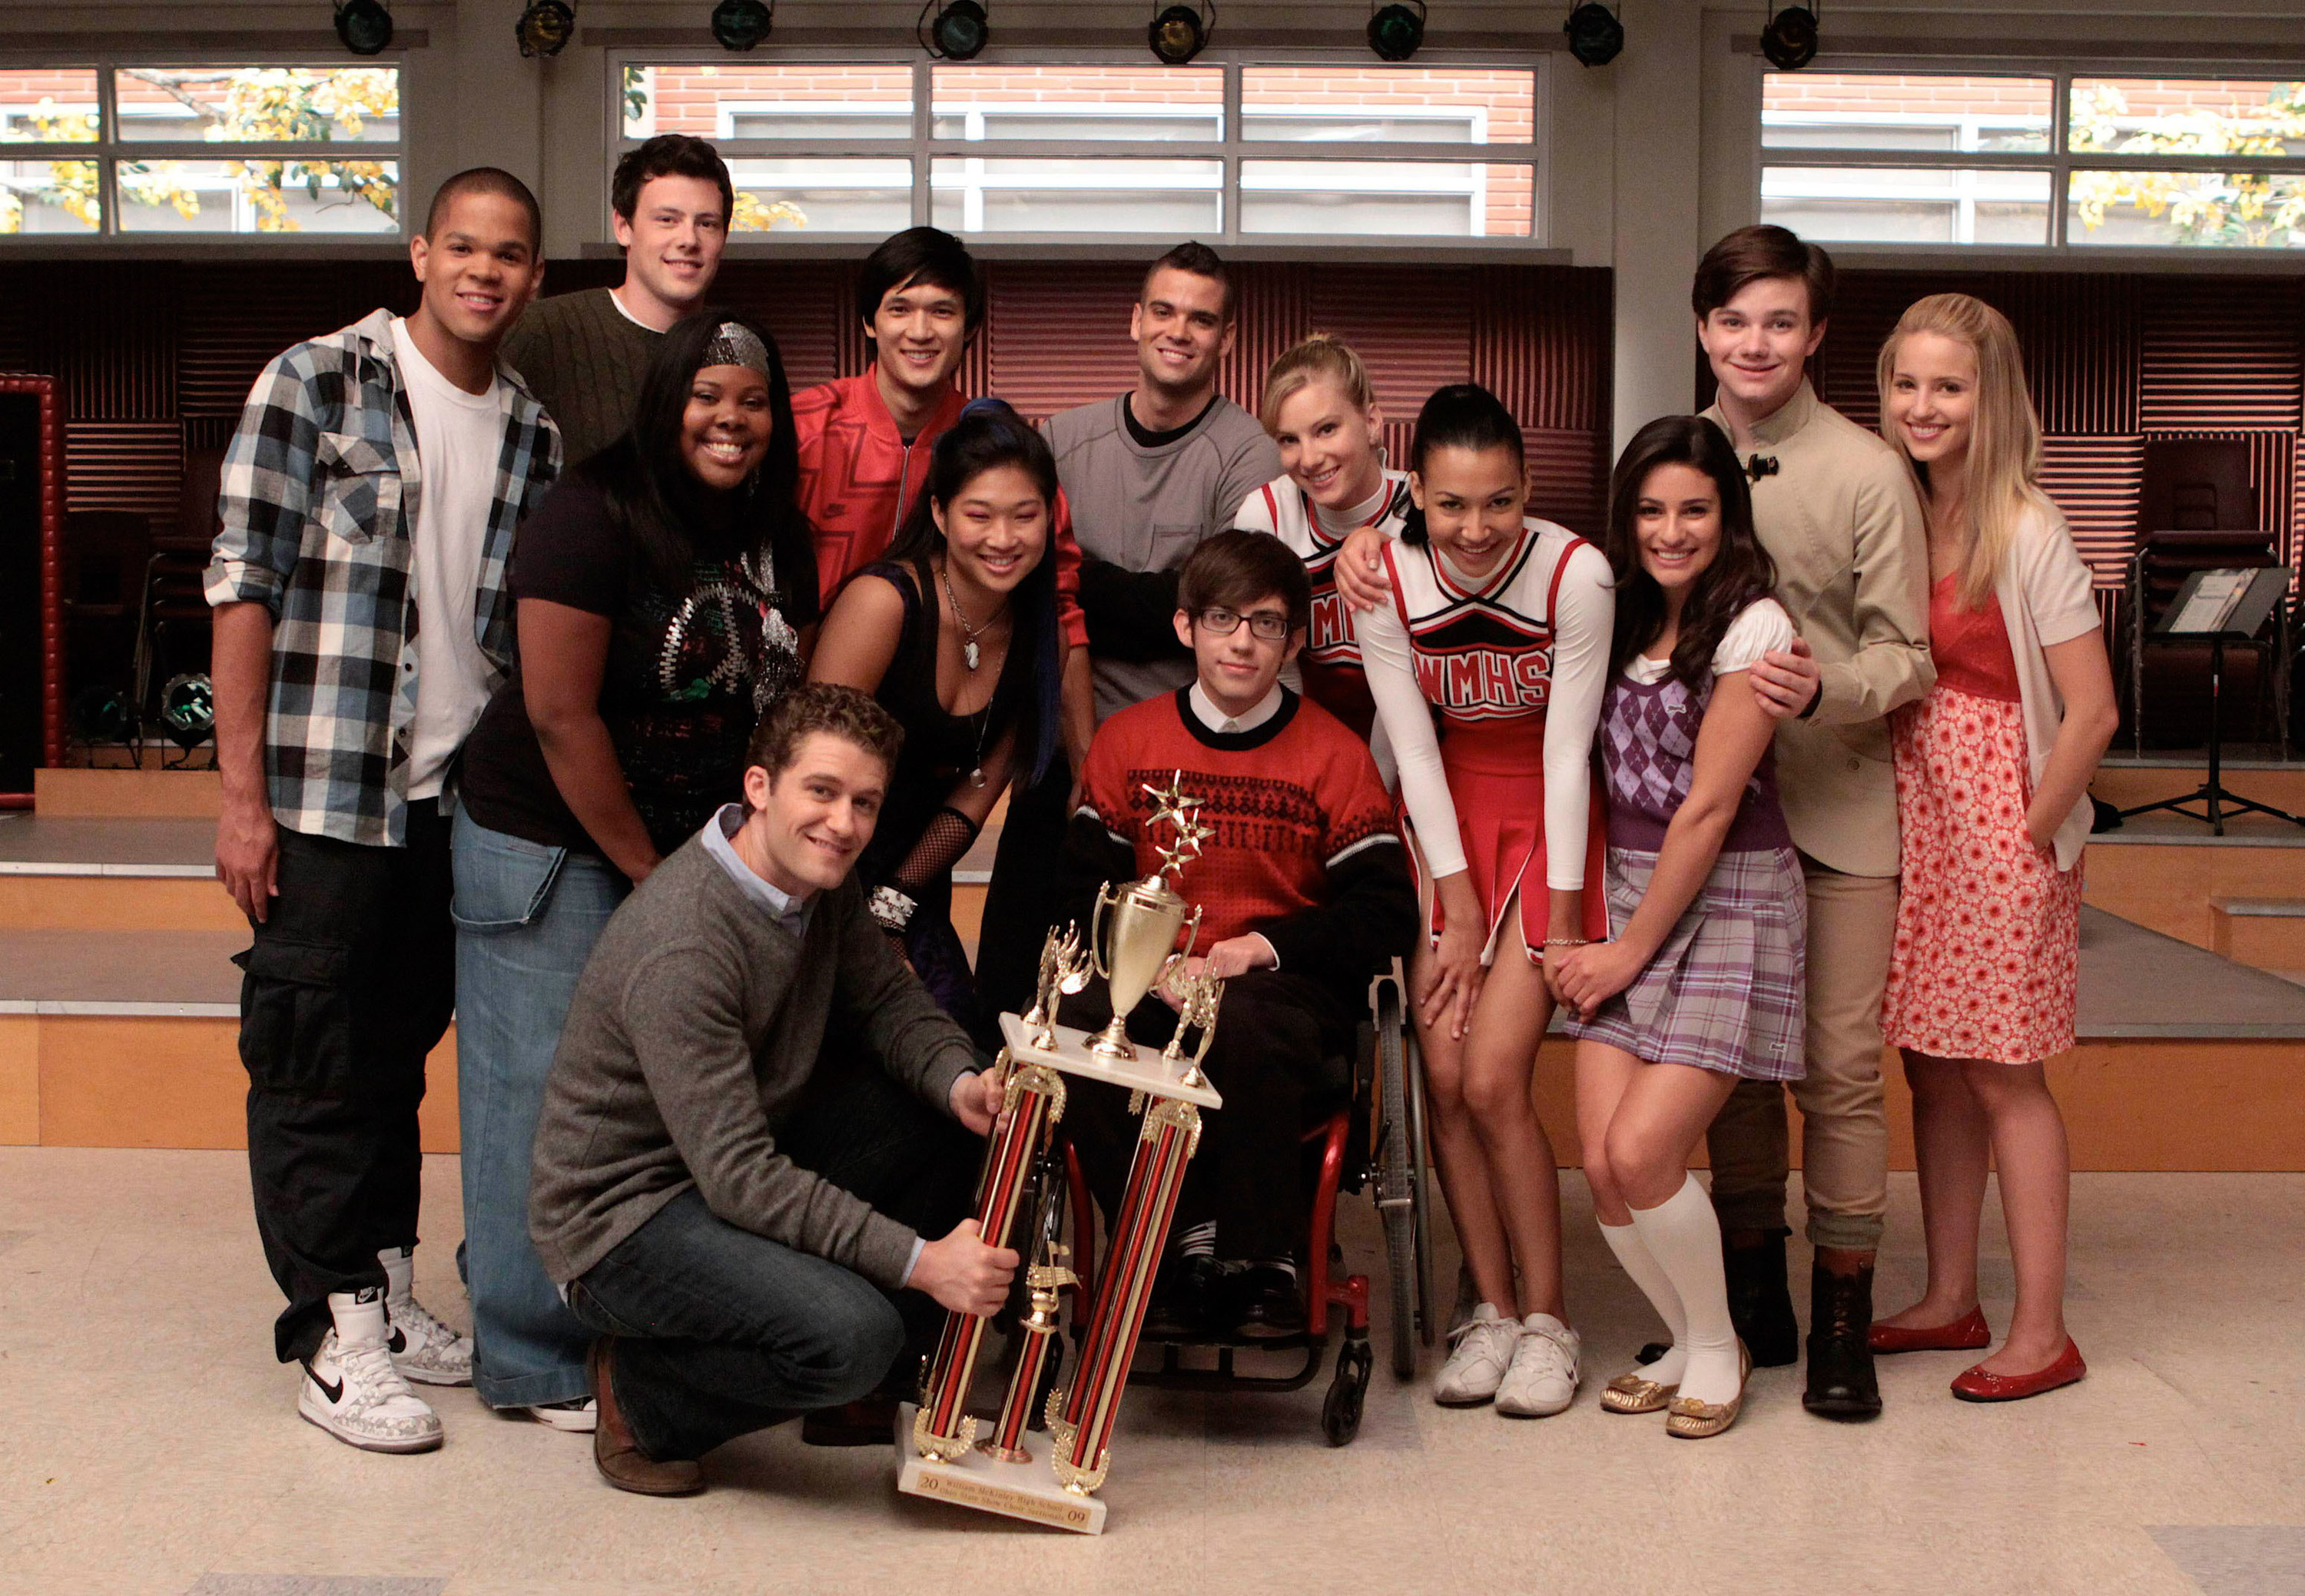 cast members on the show posing with their Glee trophy